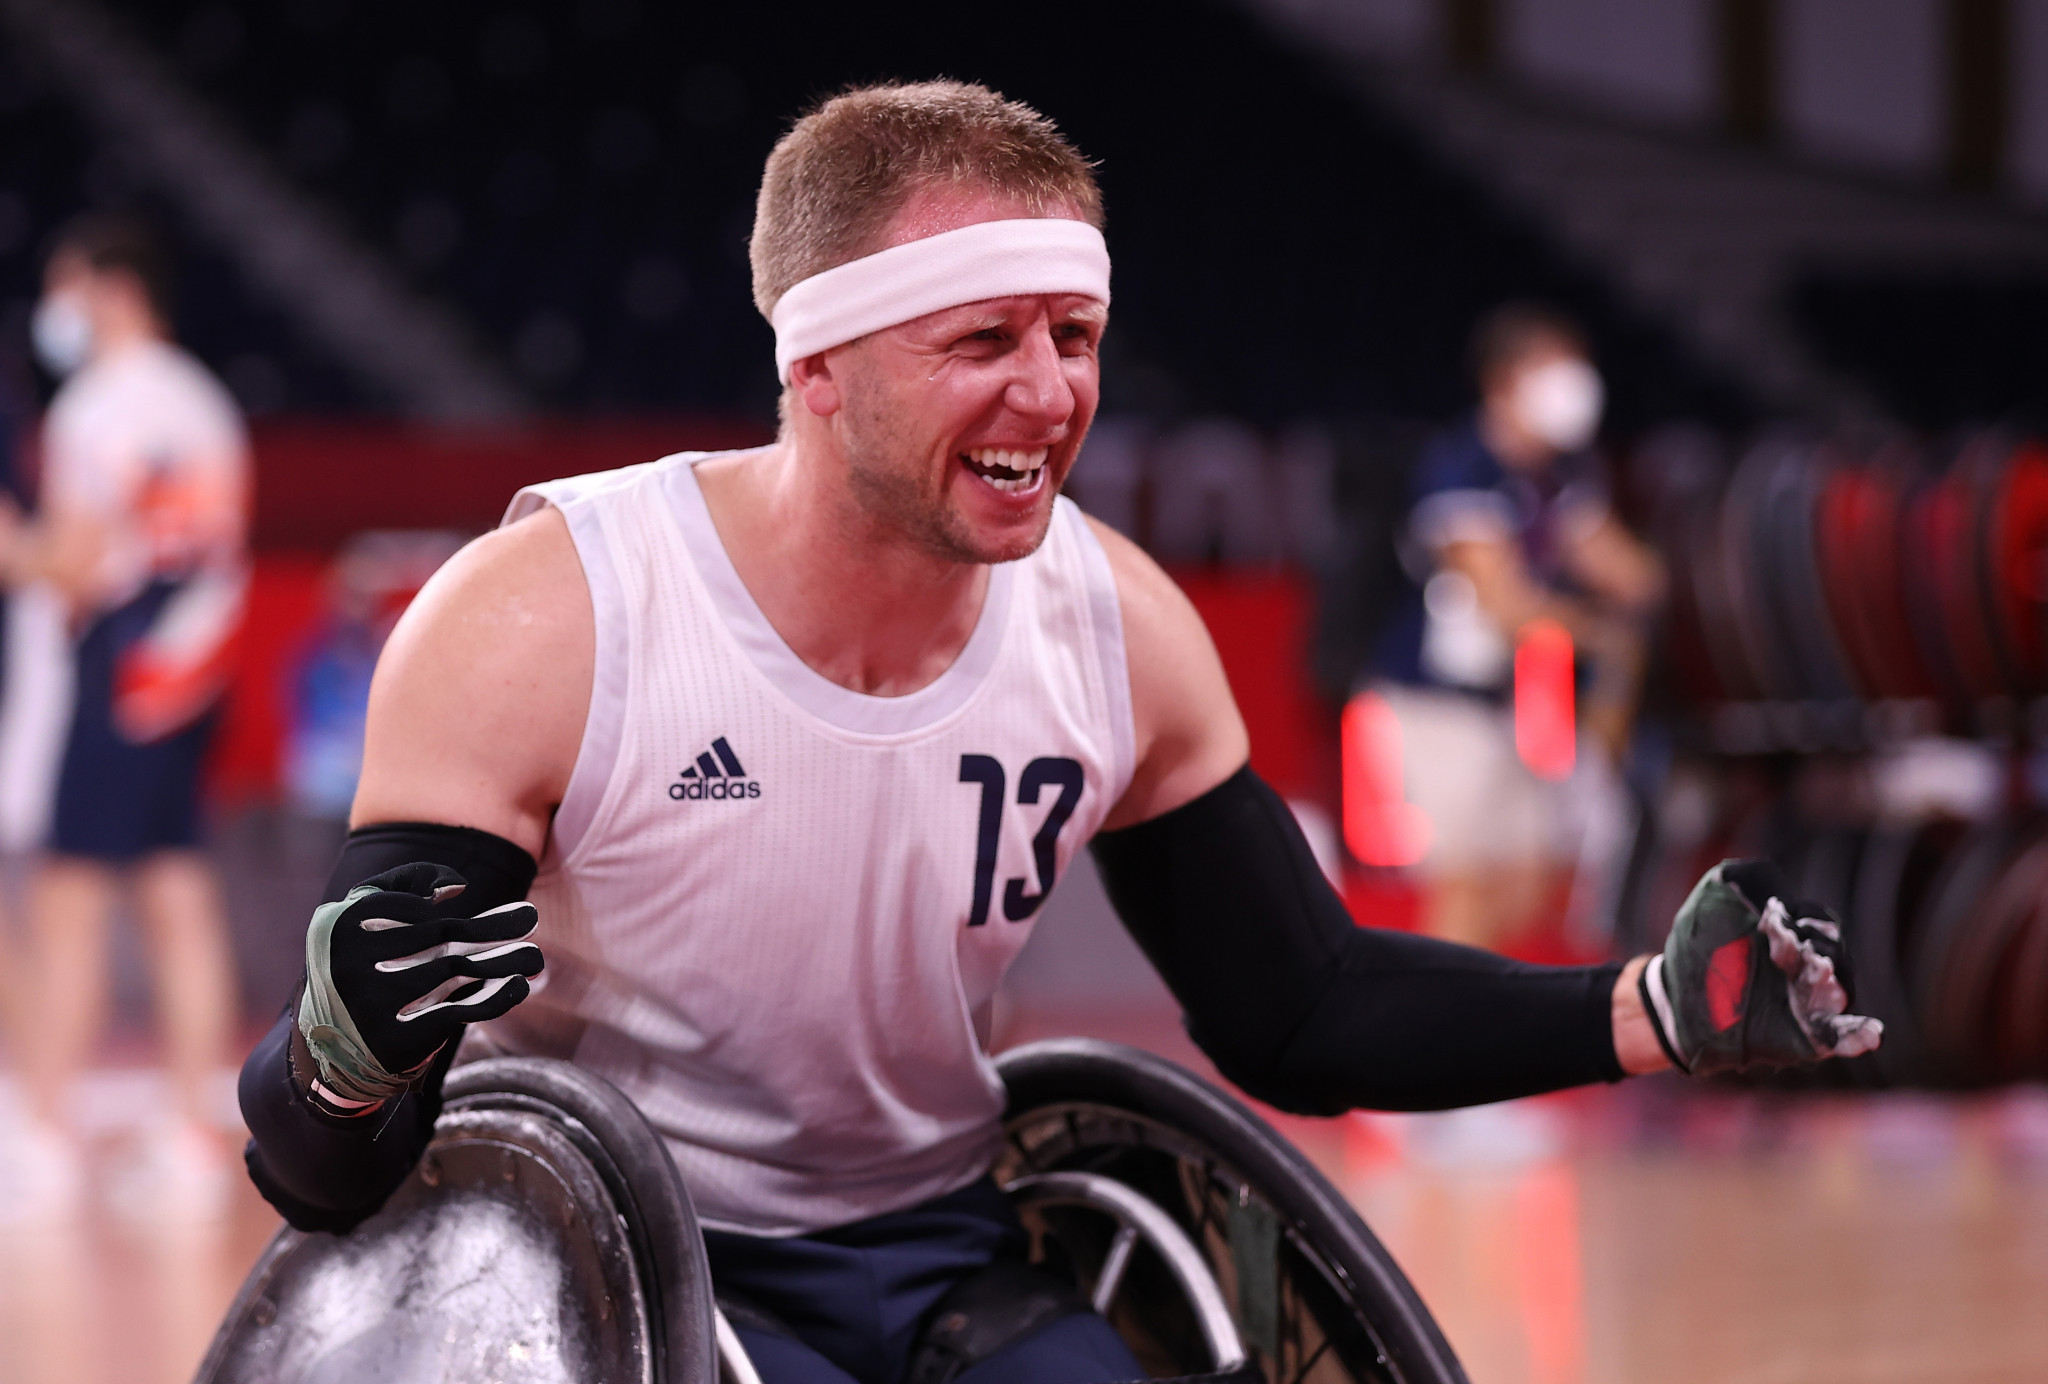 Britain and France to go for gold at Wheelchair Rugby European Championship